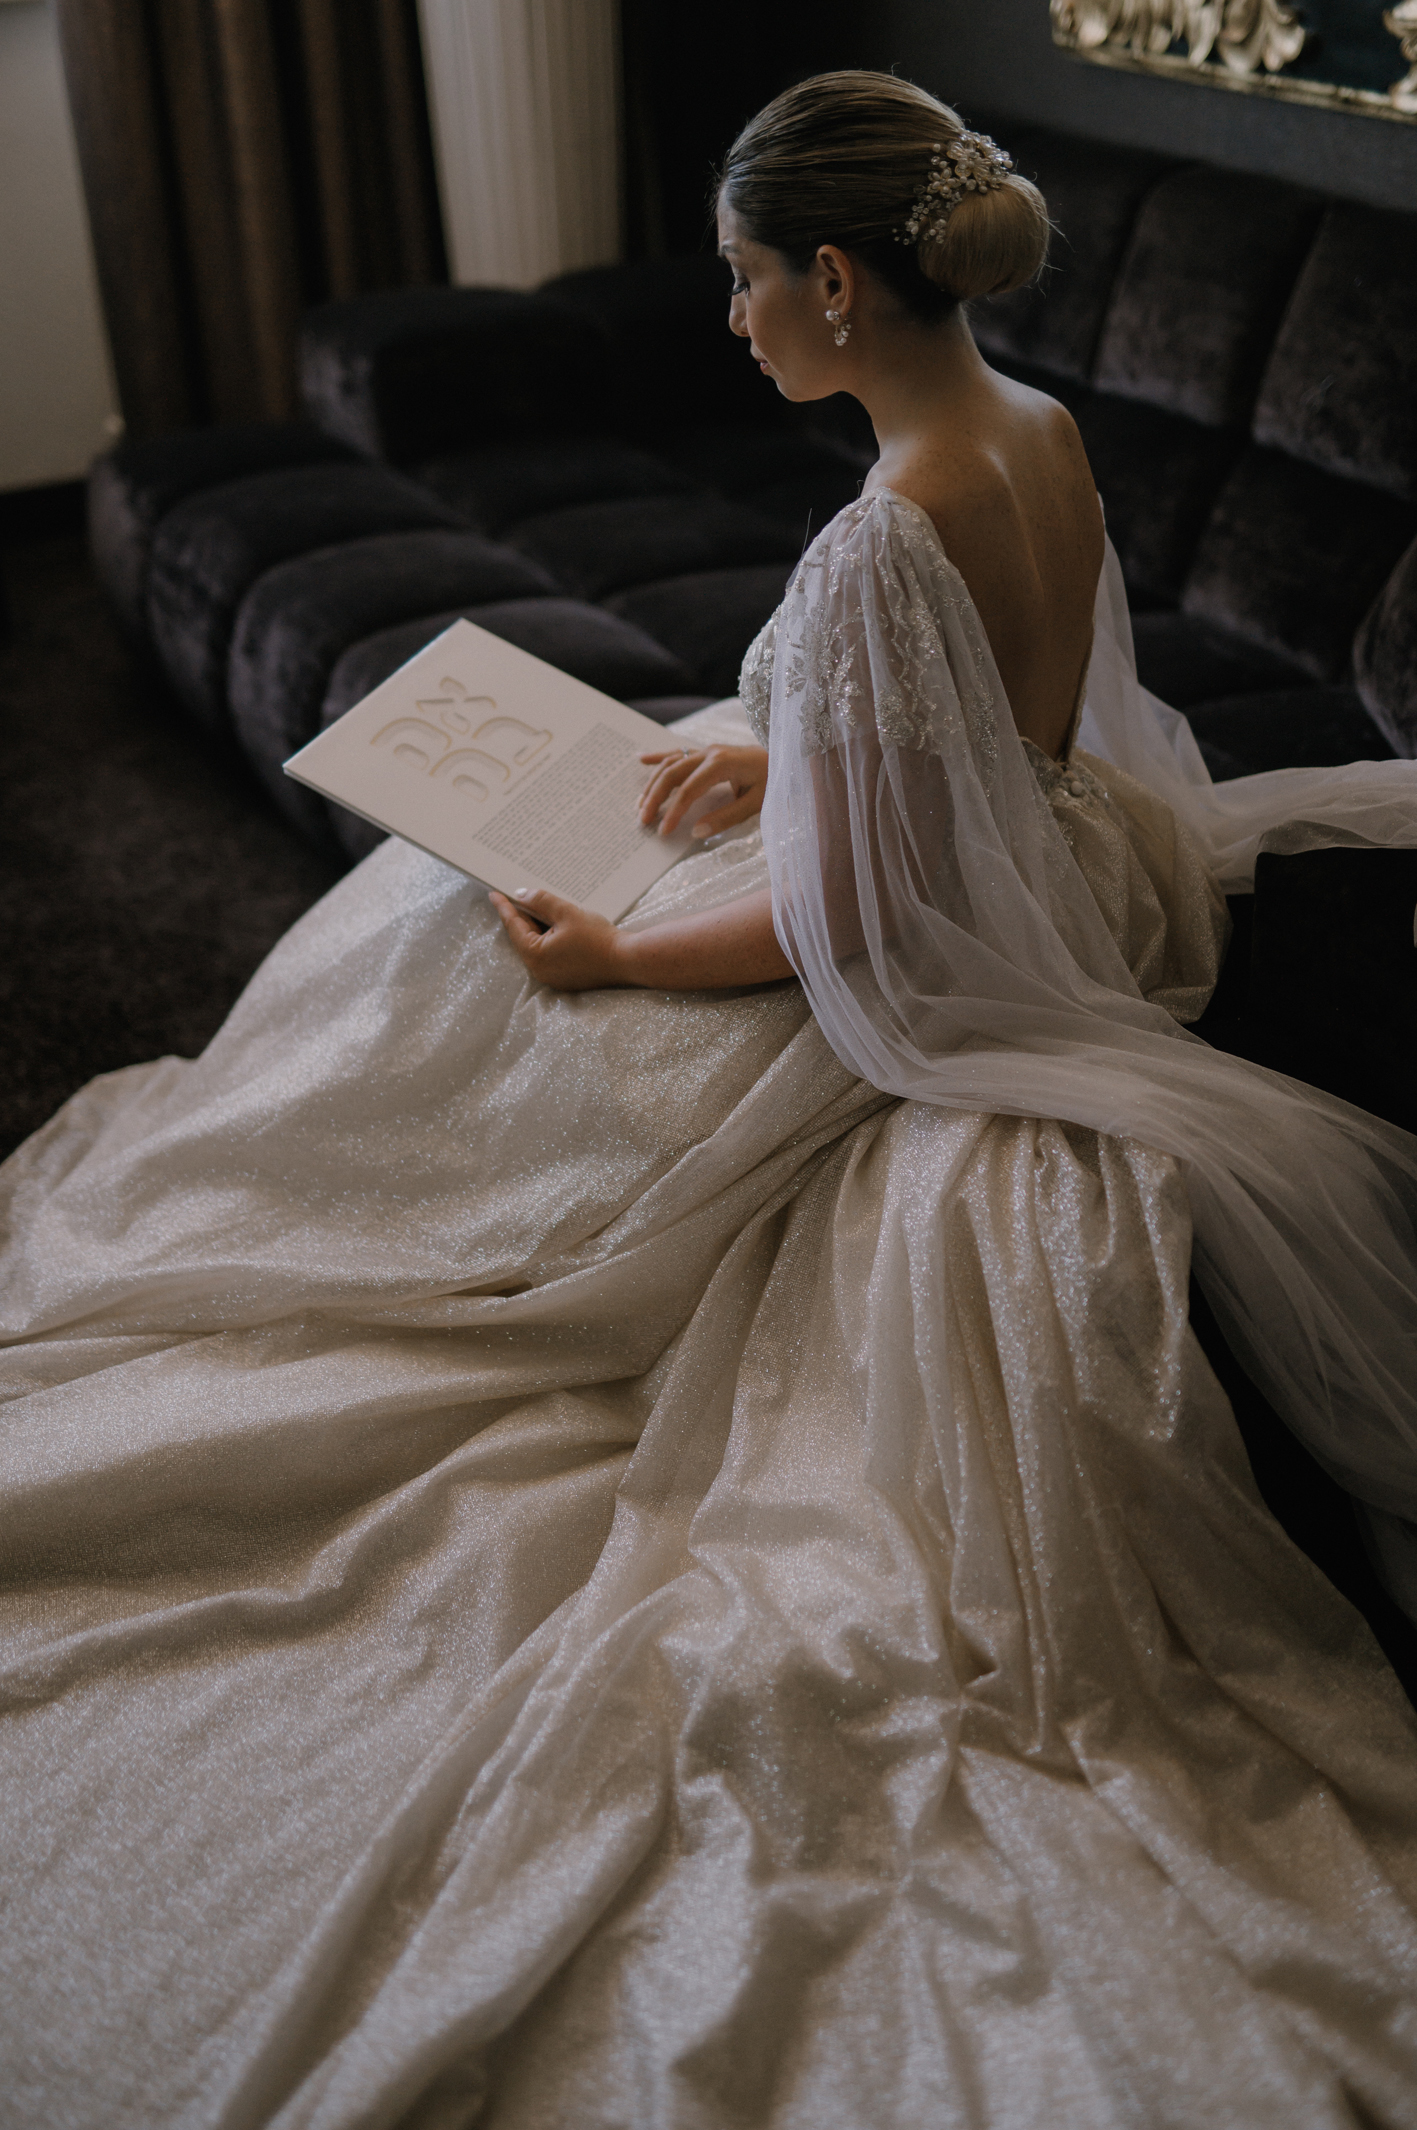 A bride holding her customized Ketubah, showing the intricate details.